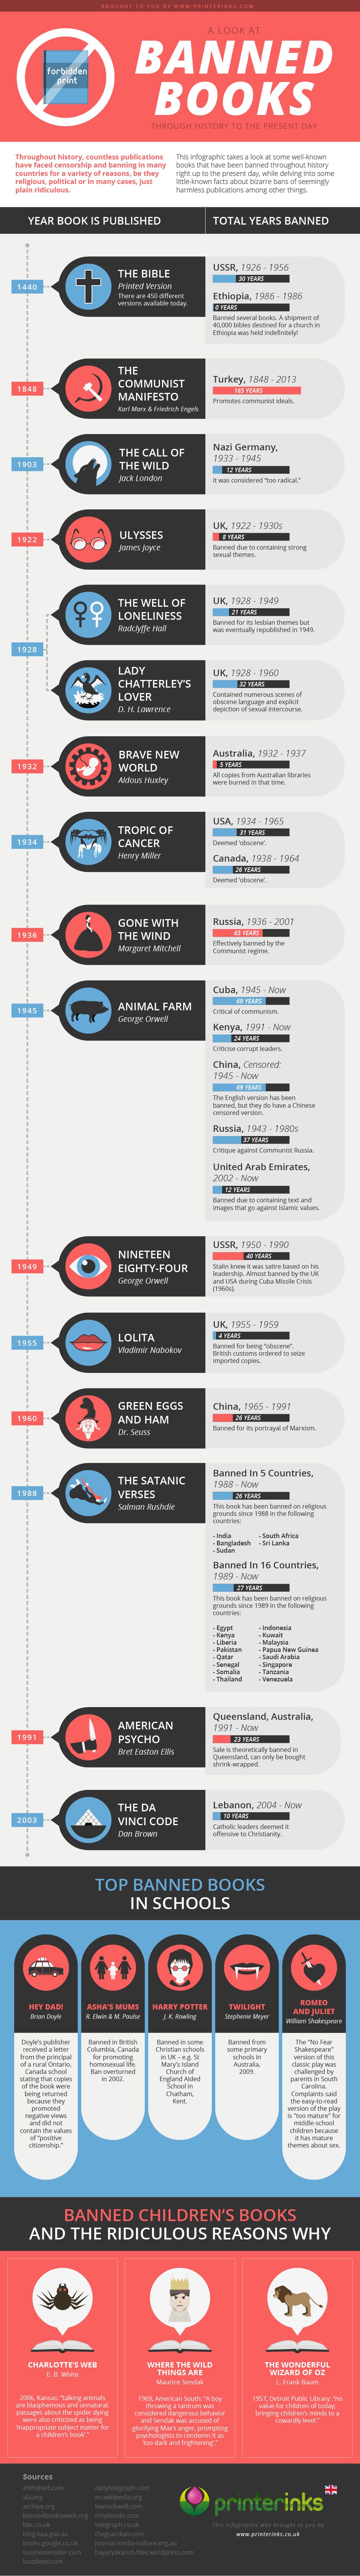 Forbidden print: a brief history of banned books [infographic]